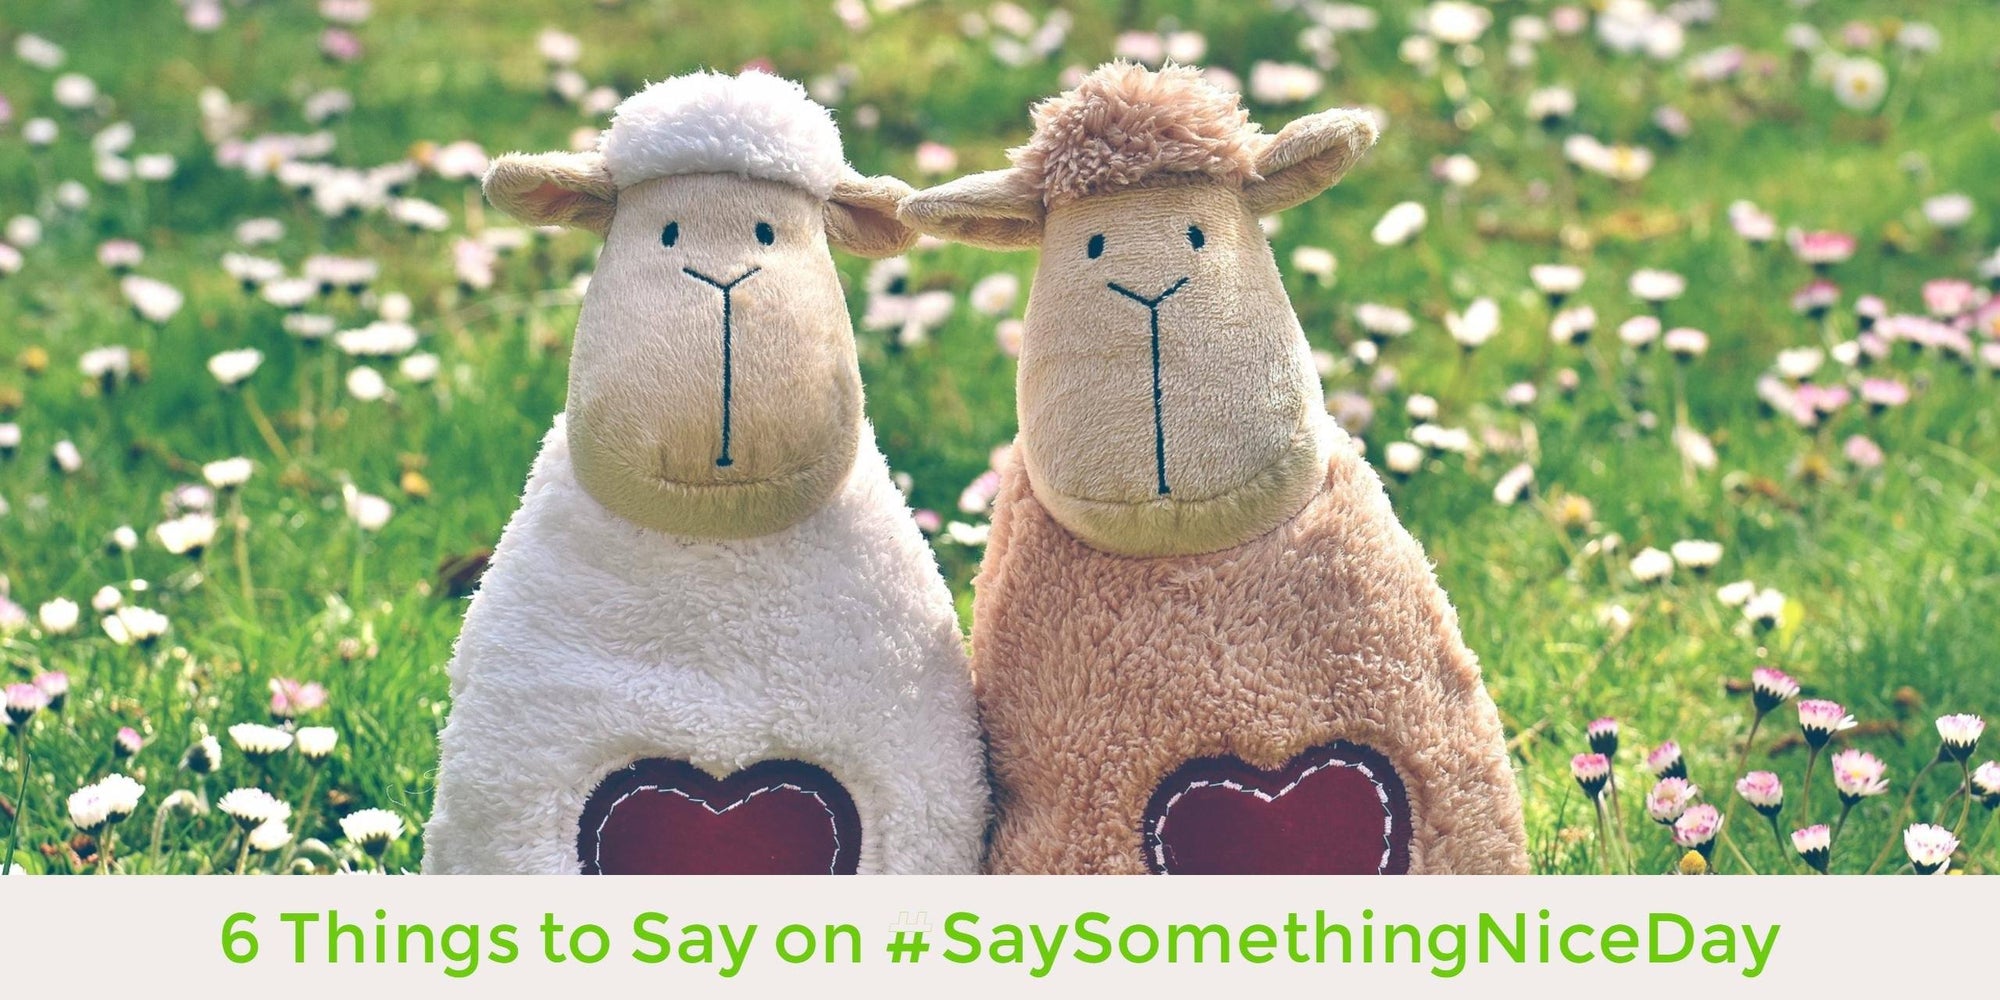 6 Things to Say on #SaySomethingNiceDay